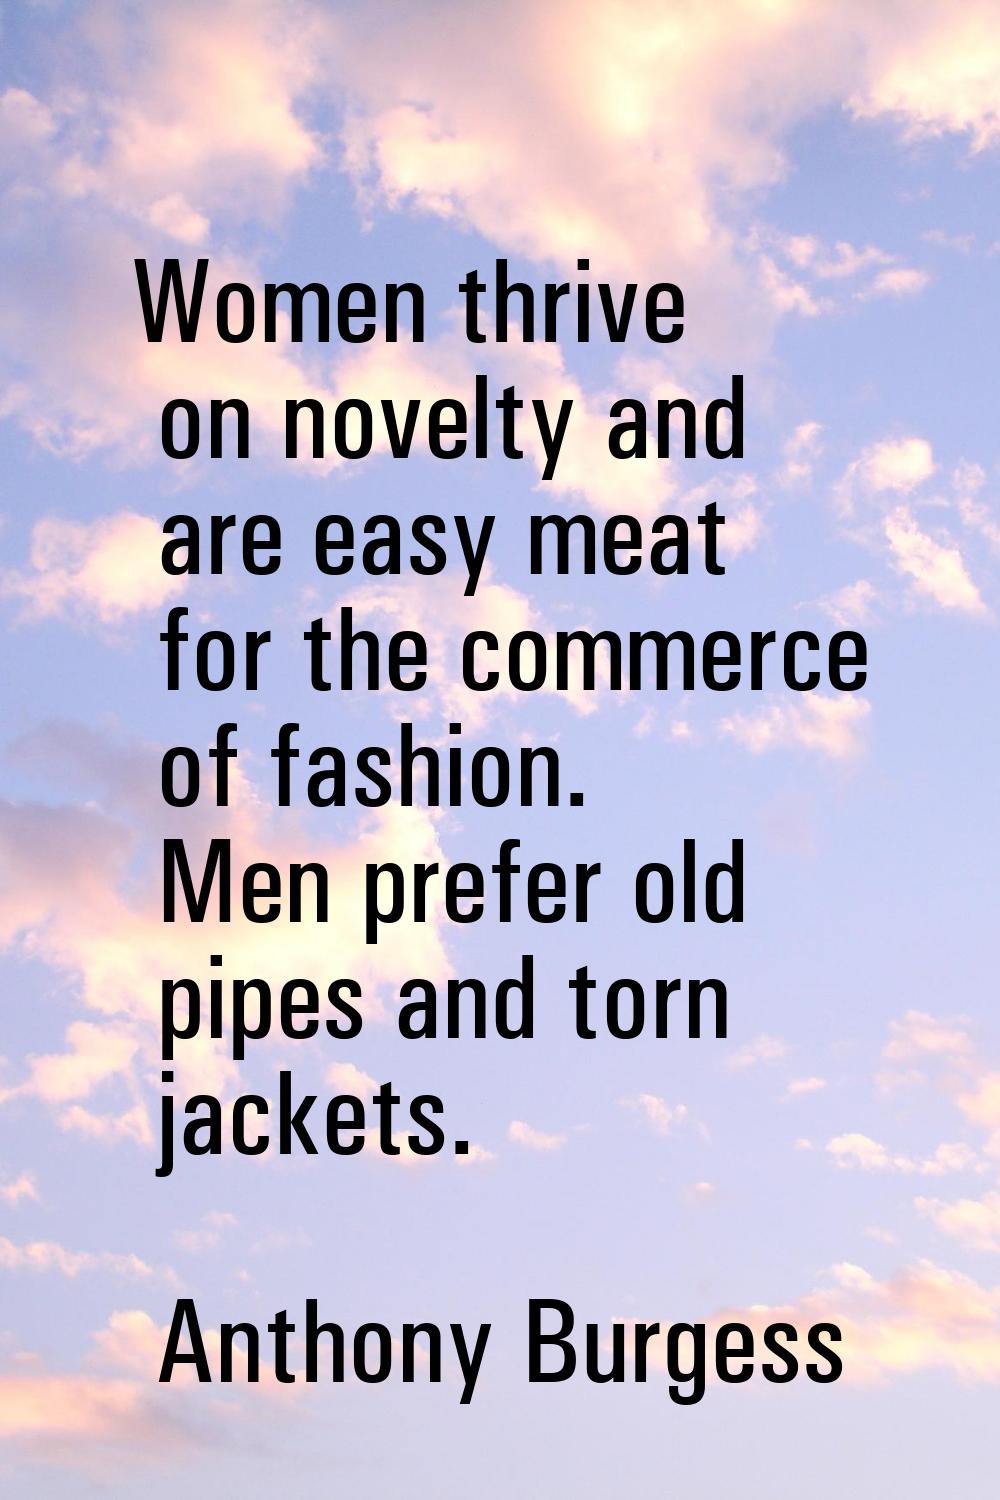 Women thrive on novelty and are easy meat for the commerce of fashion. Men prefer old pipes and tor